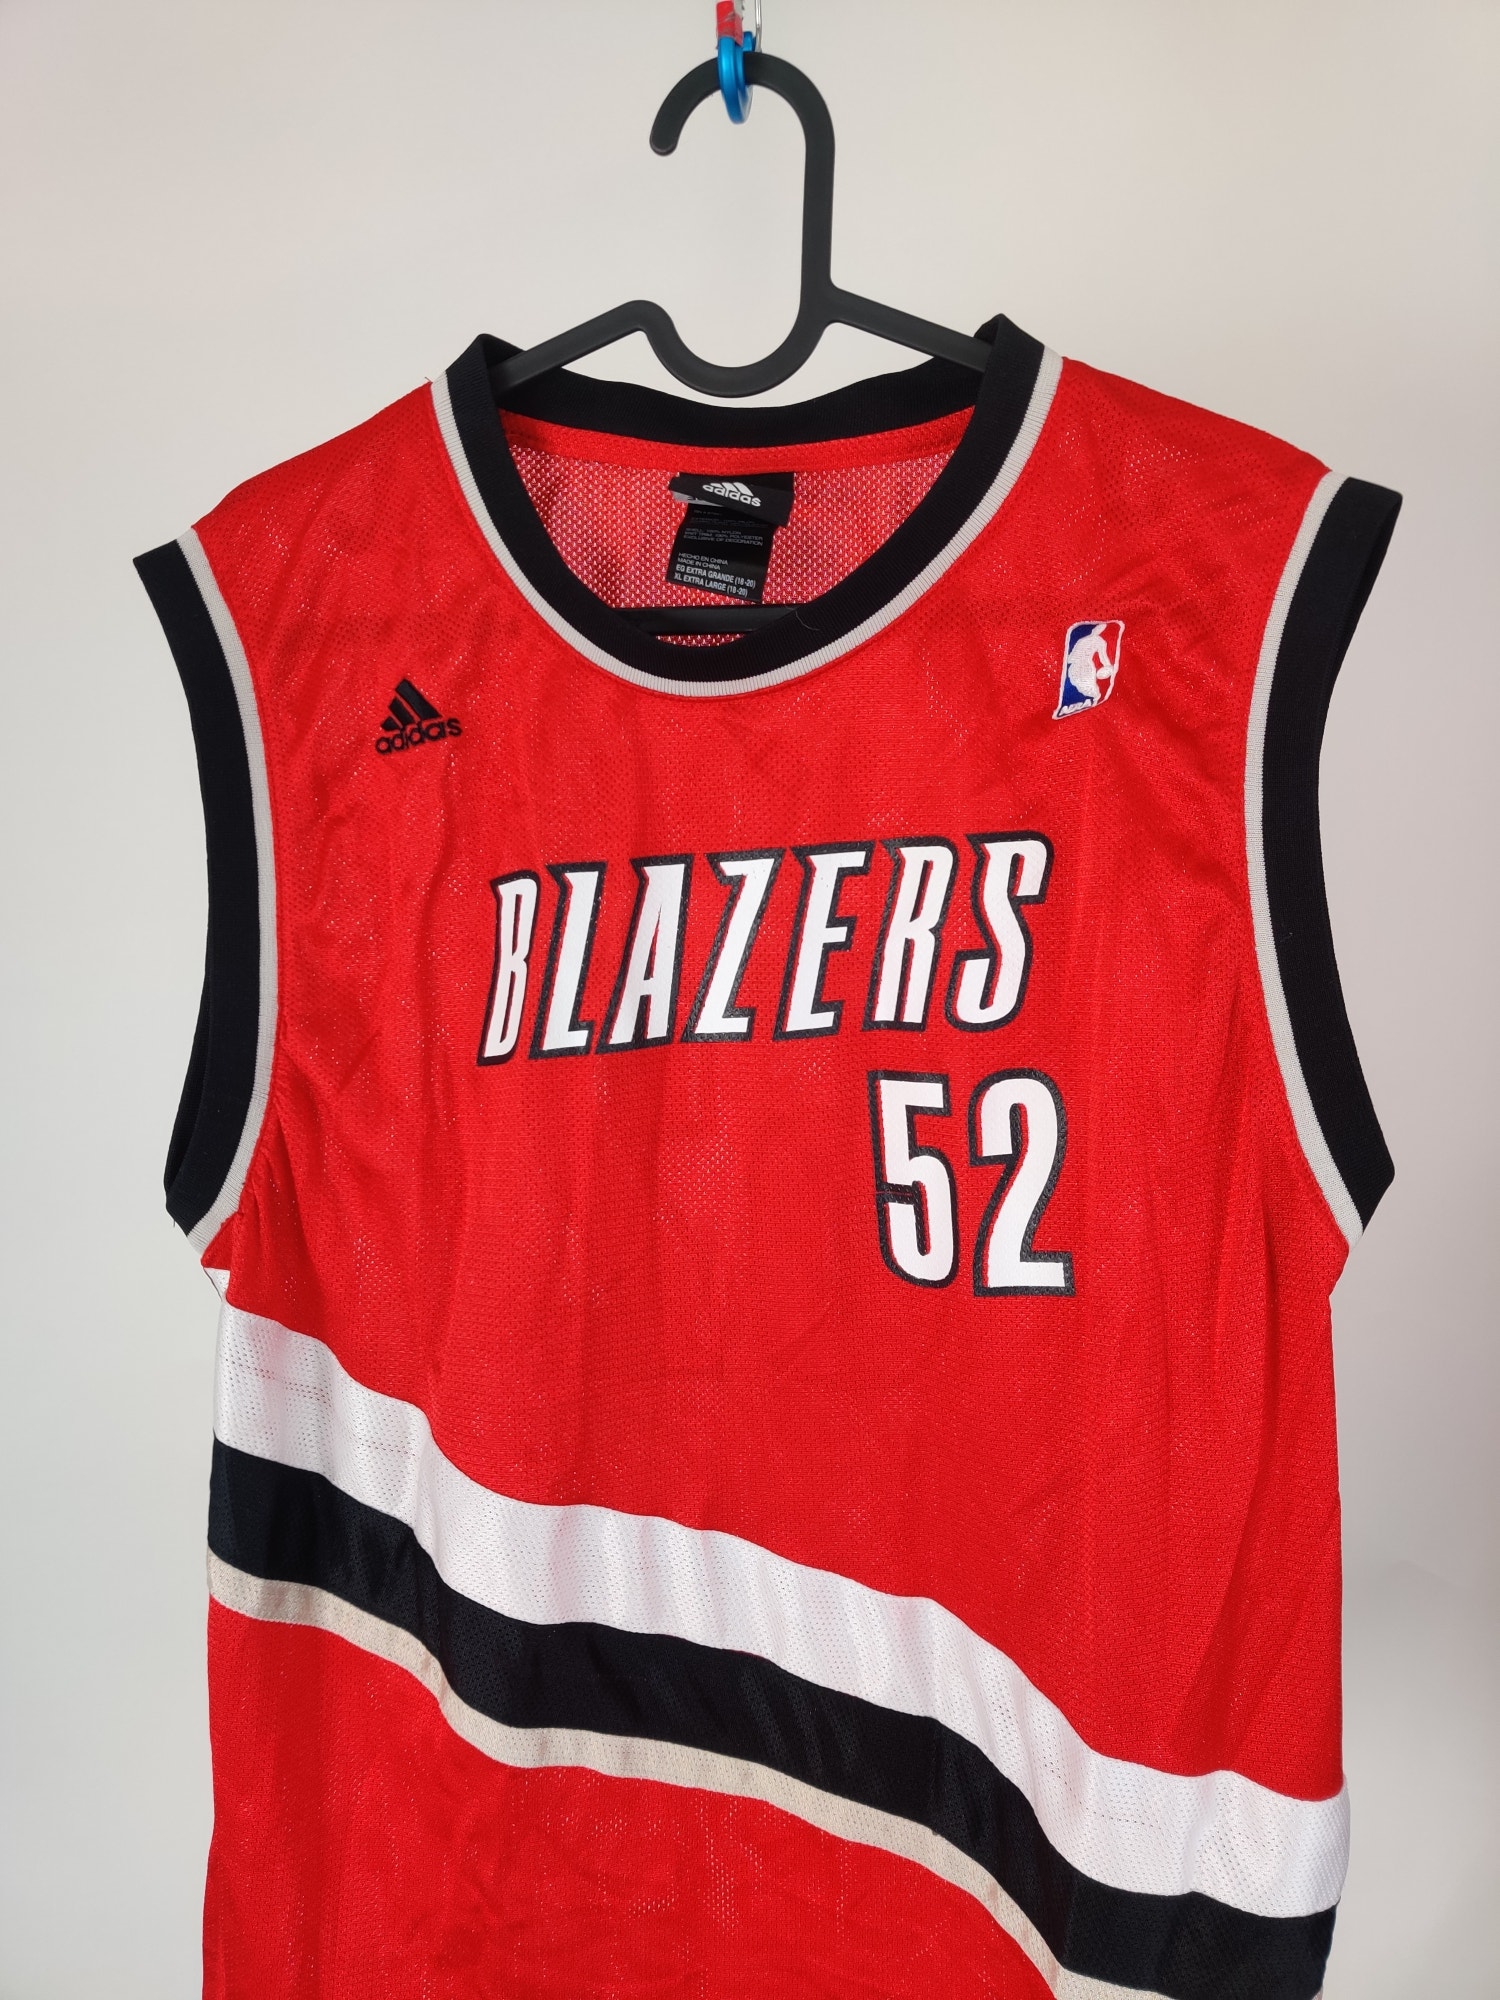 (V) Adidas NBA Portland Trail Blazers Youth jersey players Oden #52 sz XL  - Picture 2 of 11